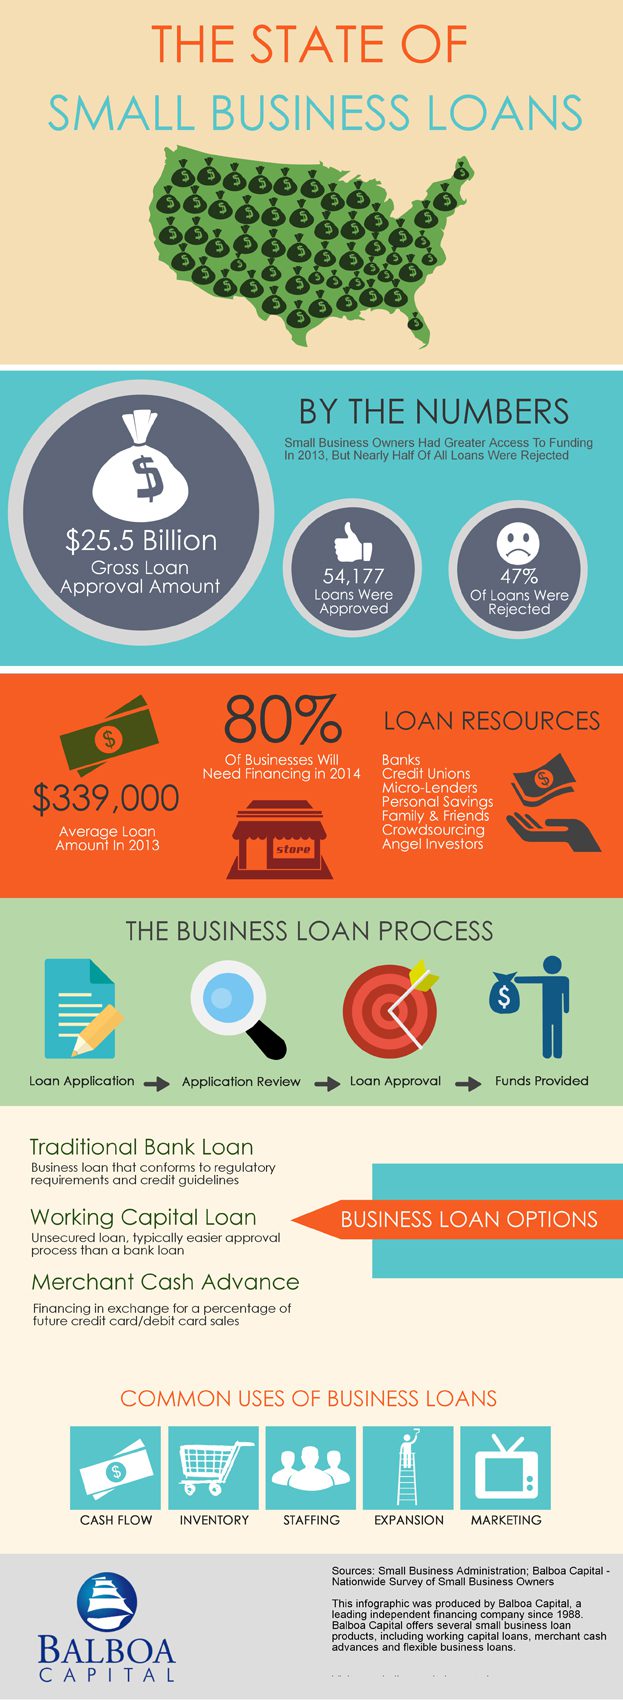 The Average Small Business Loan Amount